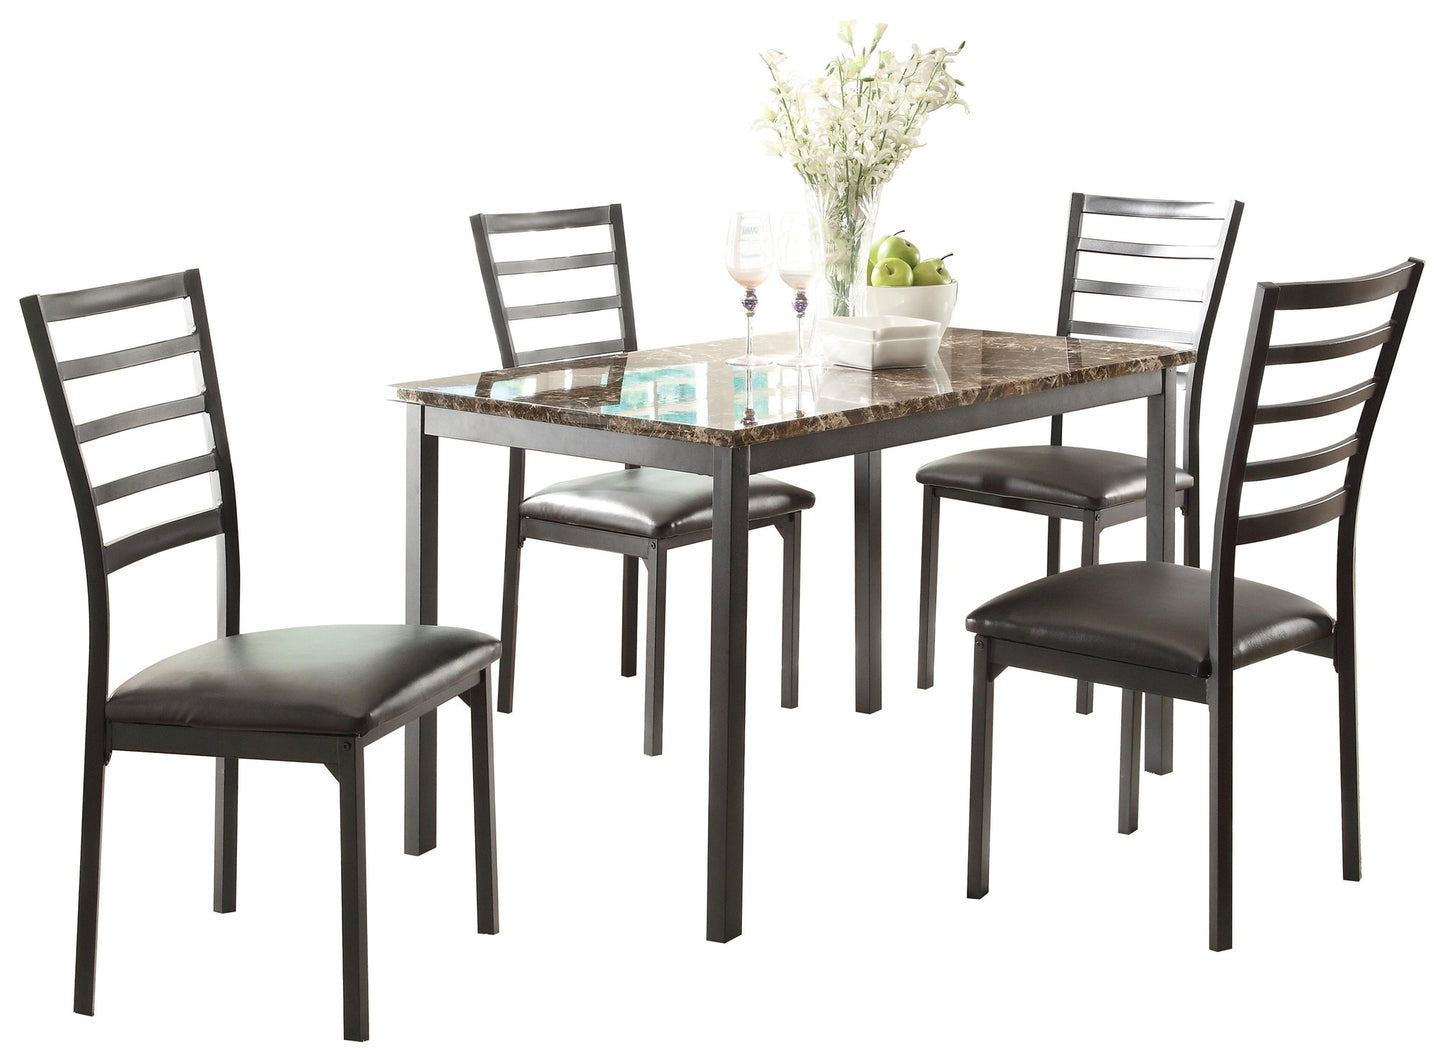 Homelegance Flannery Metal 5PC Faux Marble Dining Set Table, 4 Chair in Dark Brown